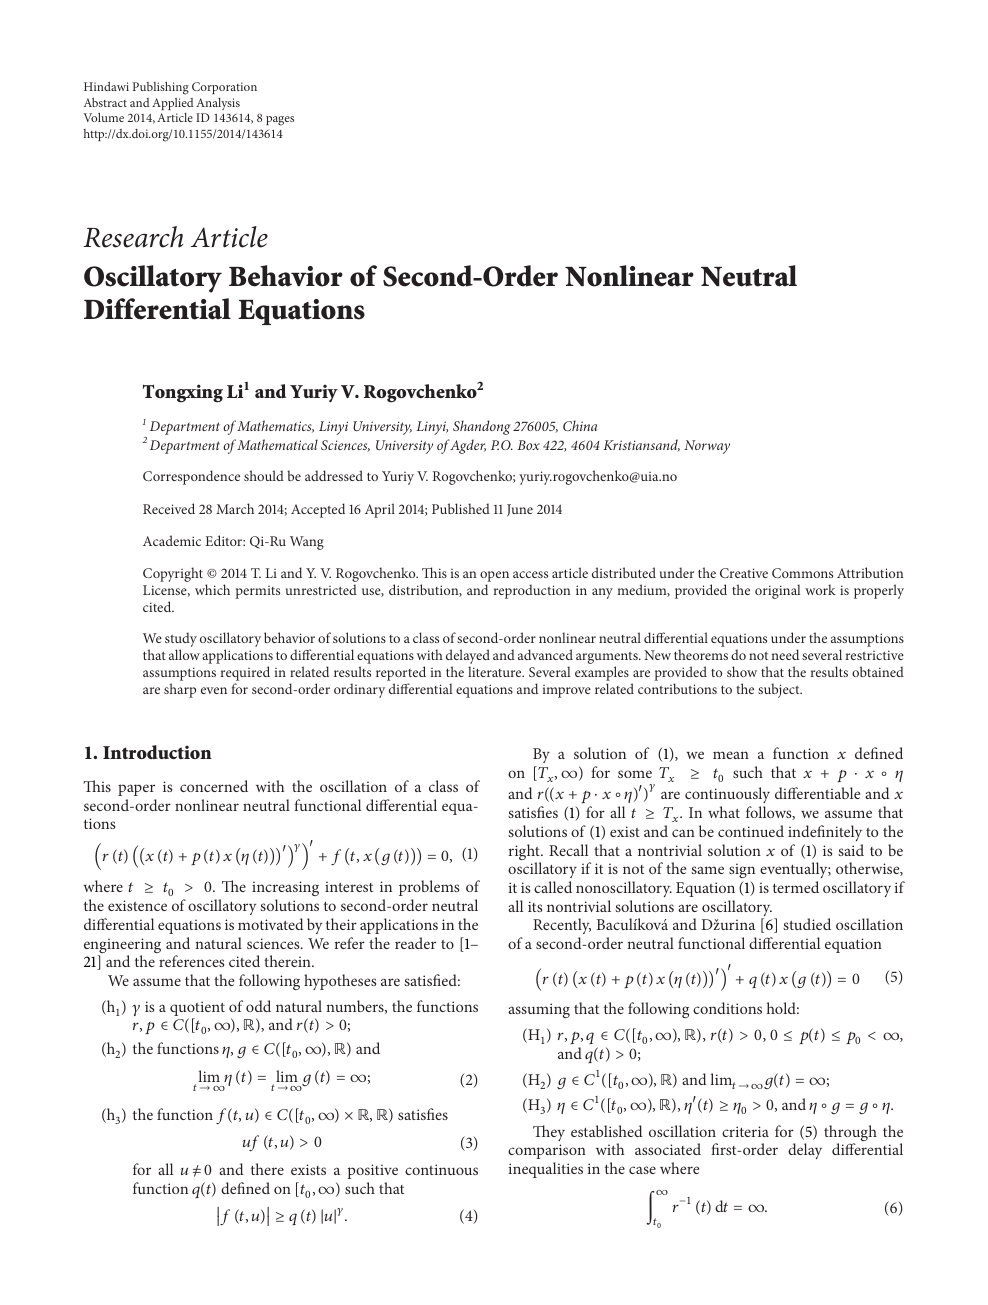 Oscillatory Behavior Of Second Order Nonlinear Neutral Differential Equations Topic Of Research Paper In Mathematics Download Scholarly Article Pdf And Read For Free On Cyberleninka Open Science Hub